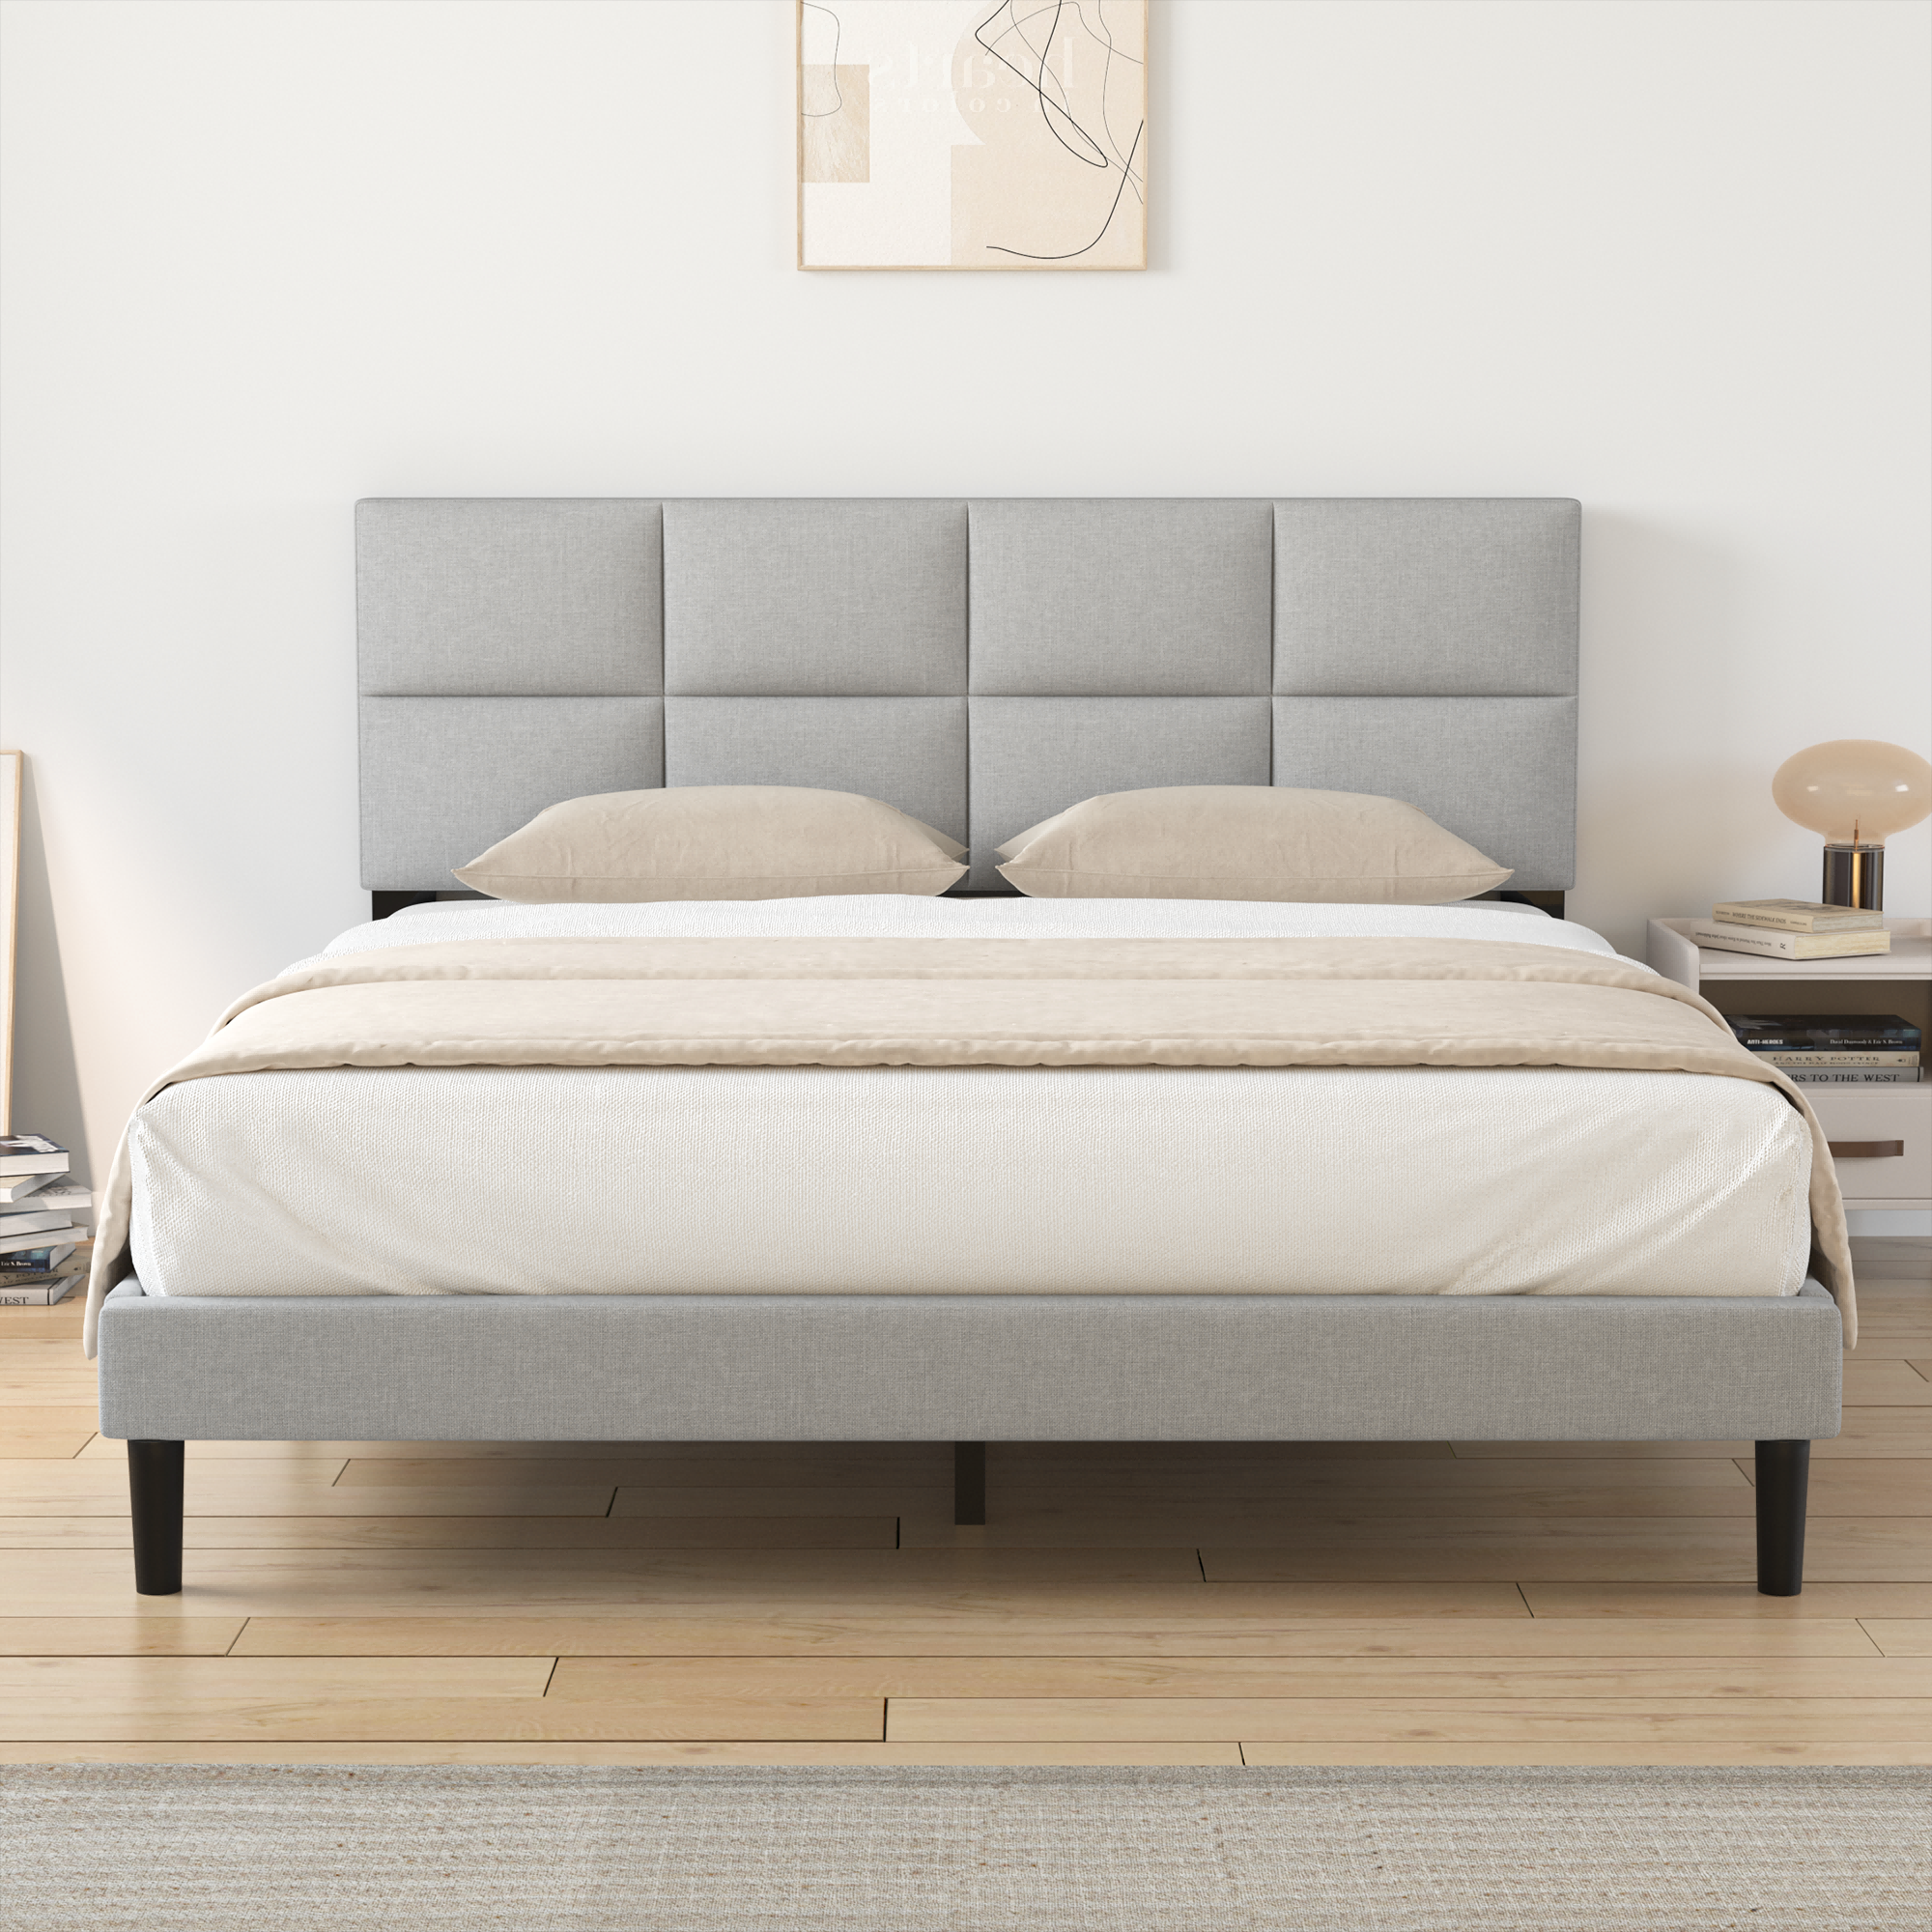 HAIIDE Queen Size bed Frame with Fabric Upholstered Headboard,light Gray, Easy Assembly - image 1 of 6